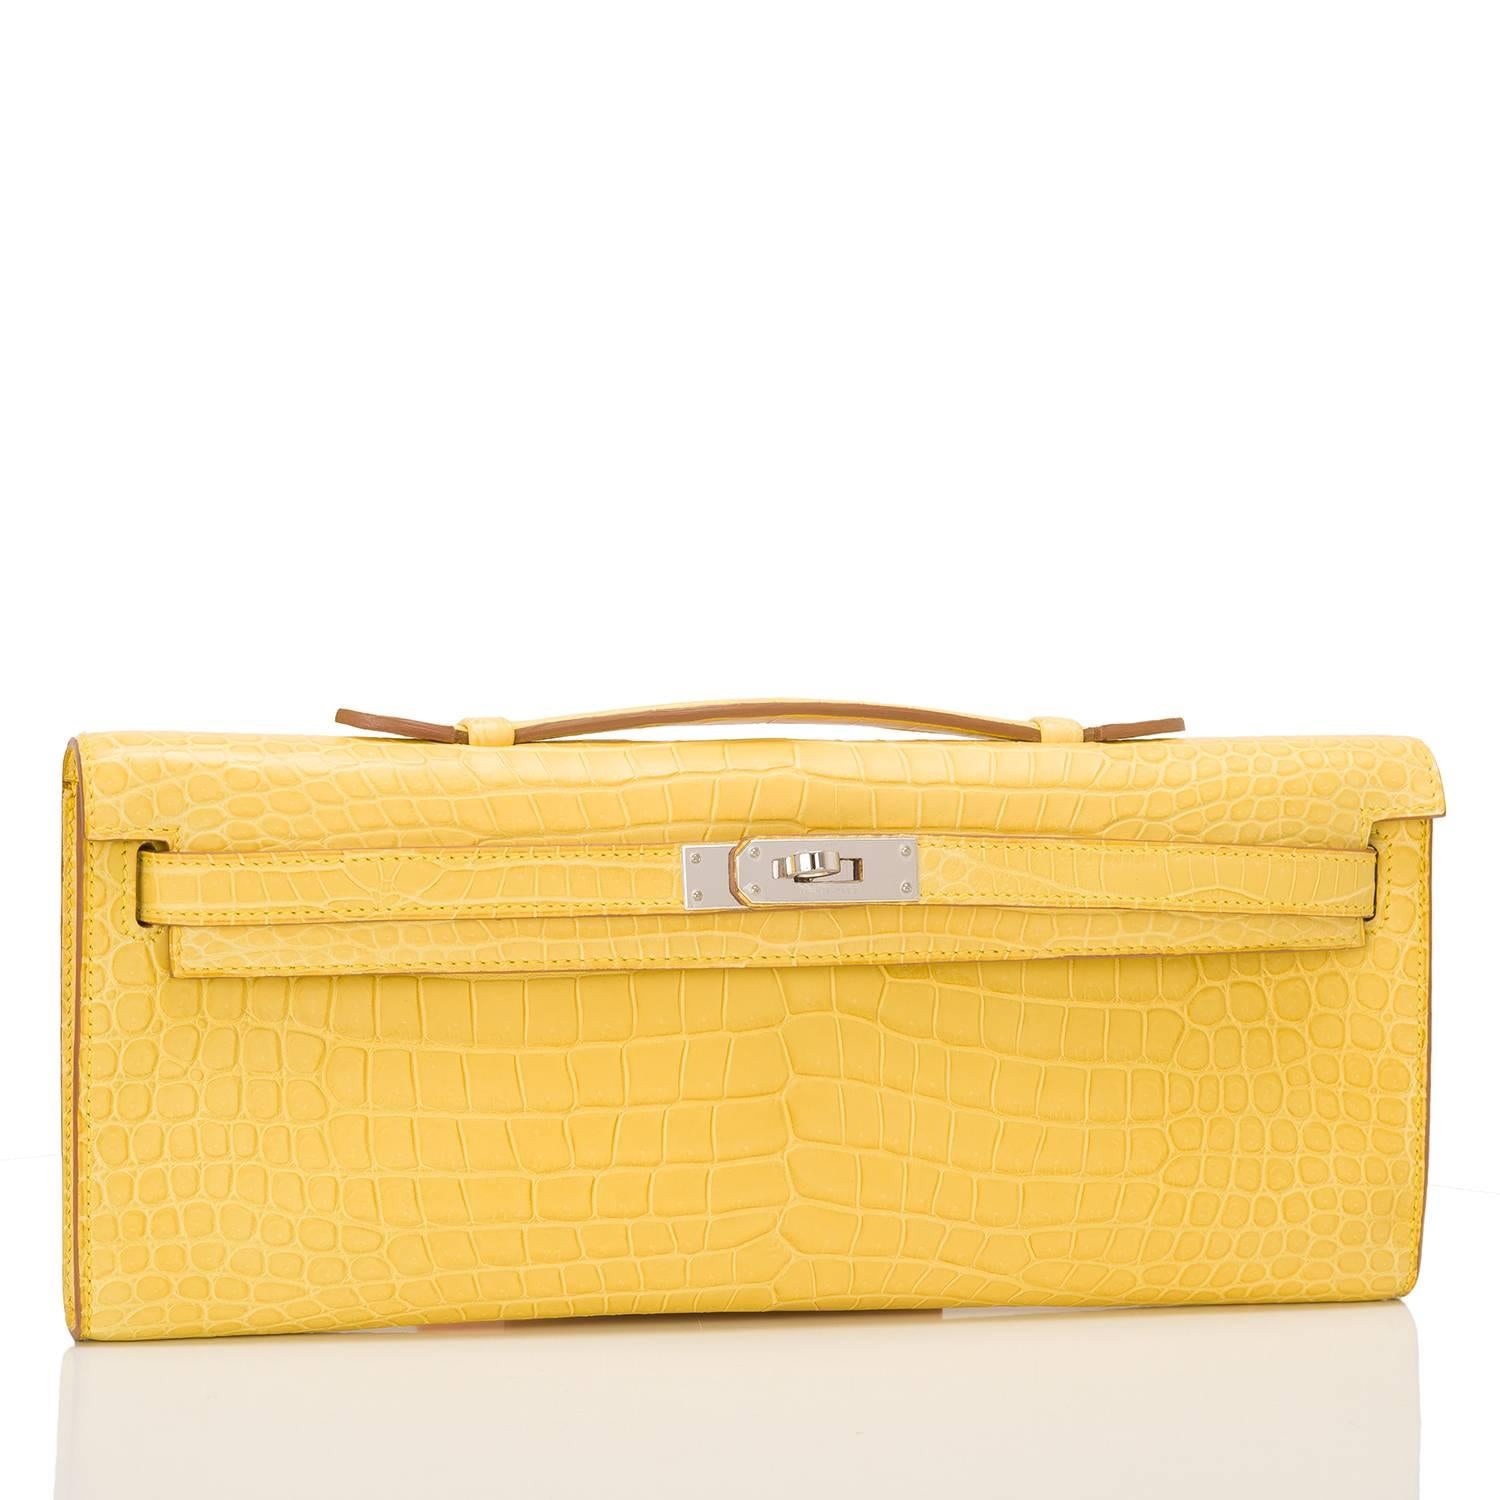 Hermes Kelly Cut of Mimosa matte Porosus Crocodile with palladium hardware.

This exotic Kelly Cut has tonal stitching, front straps with toggle closure and a top flat handle.

The interior is lined in Mimosa chevre leather and features an open